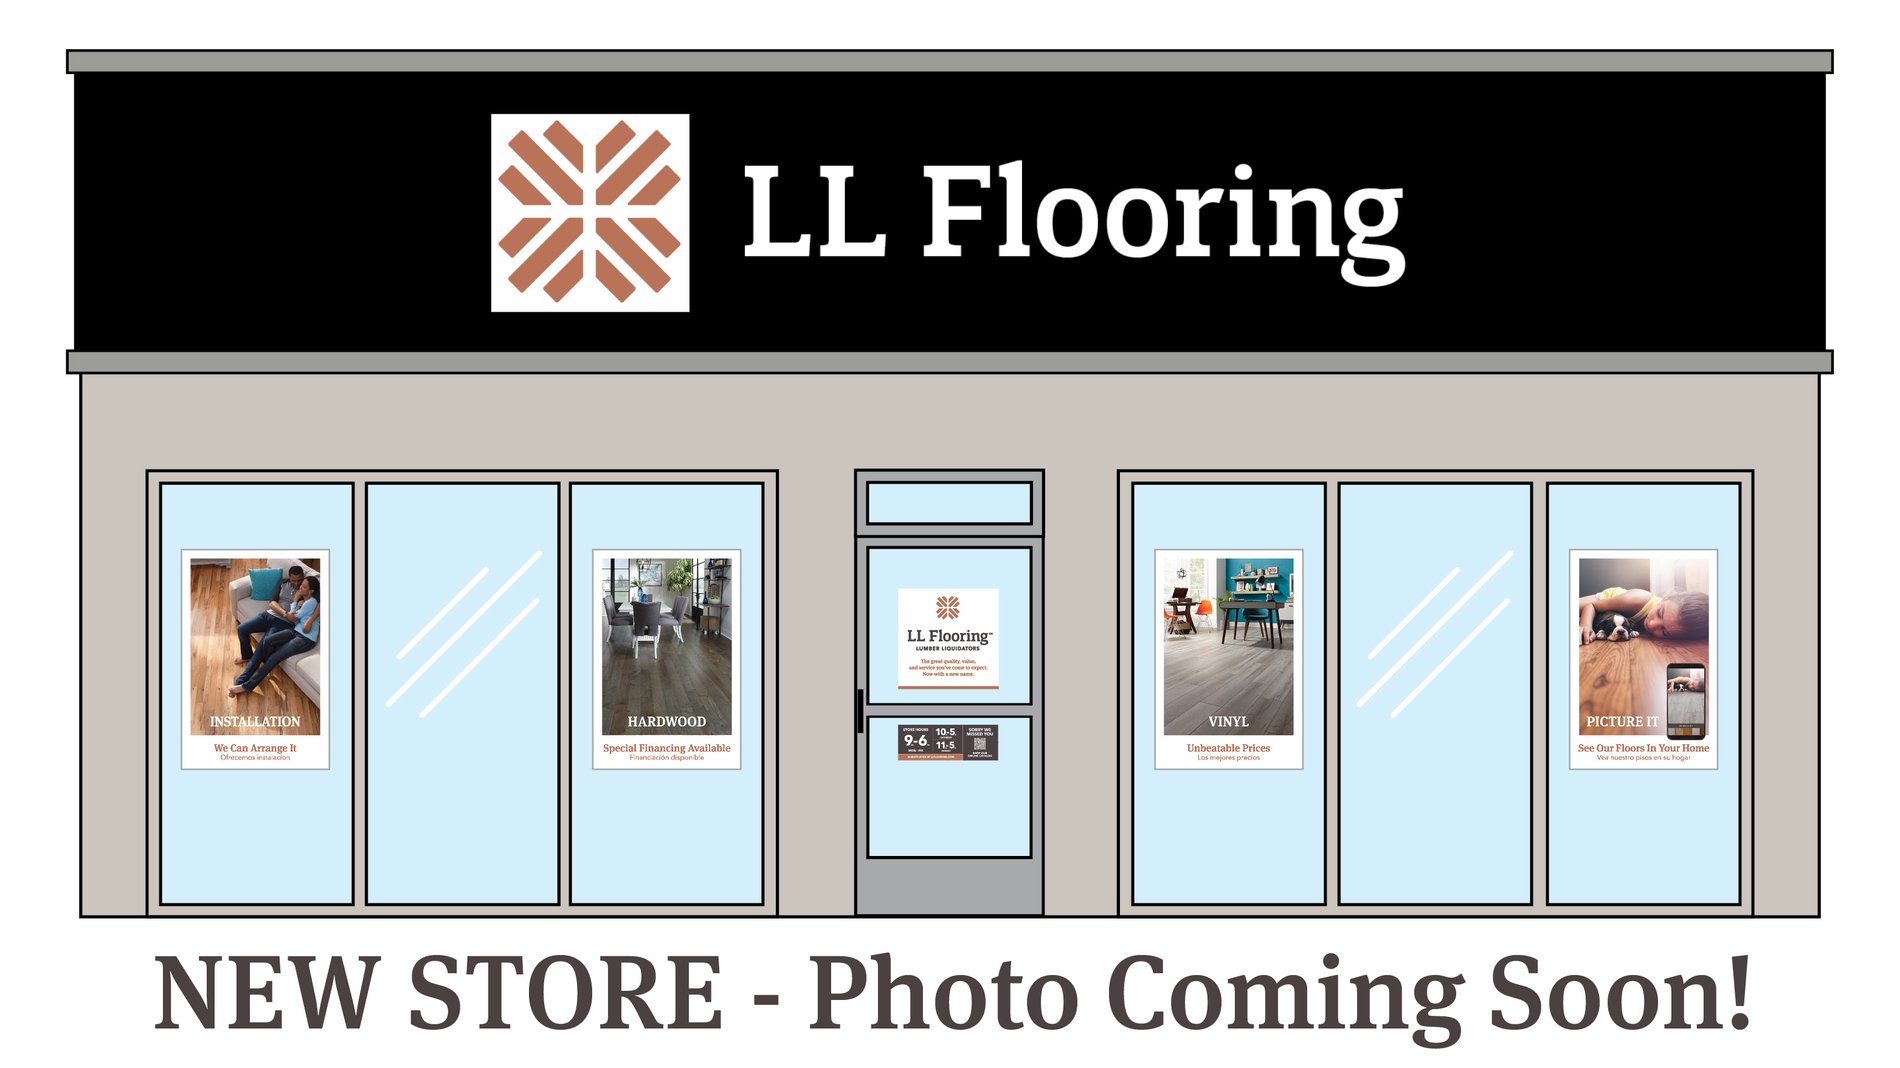 LL Flooring #1465 Concord | 308 Loudon Rd. | Storefront Photo Coming Soon